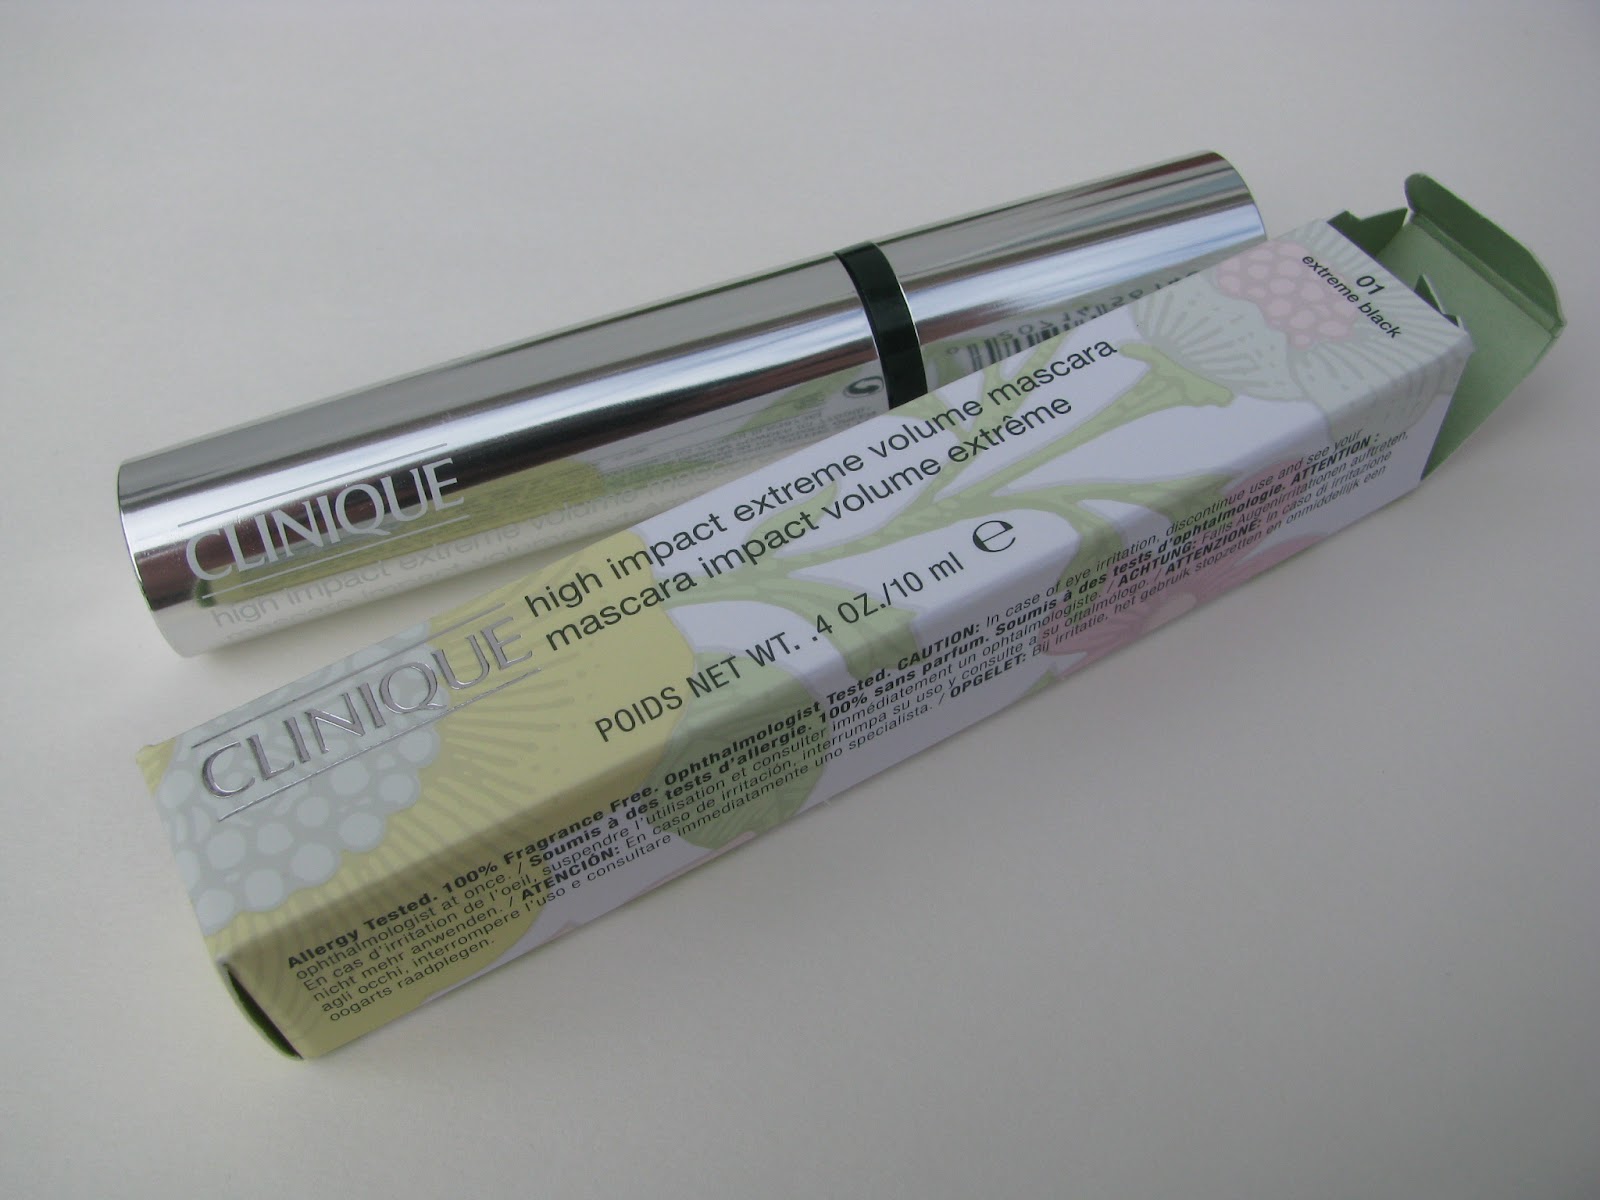 London Beauty Review: Review - Clinique High Impact Extreme Volume Mascara  in Extreme Black